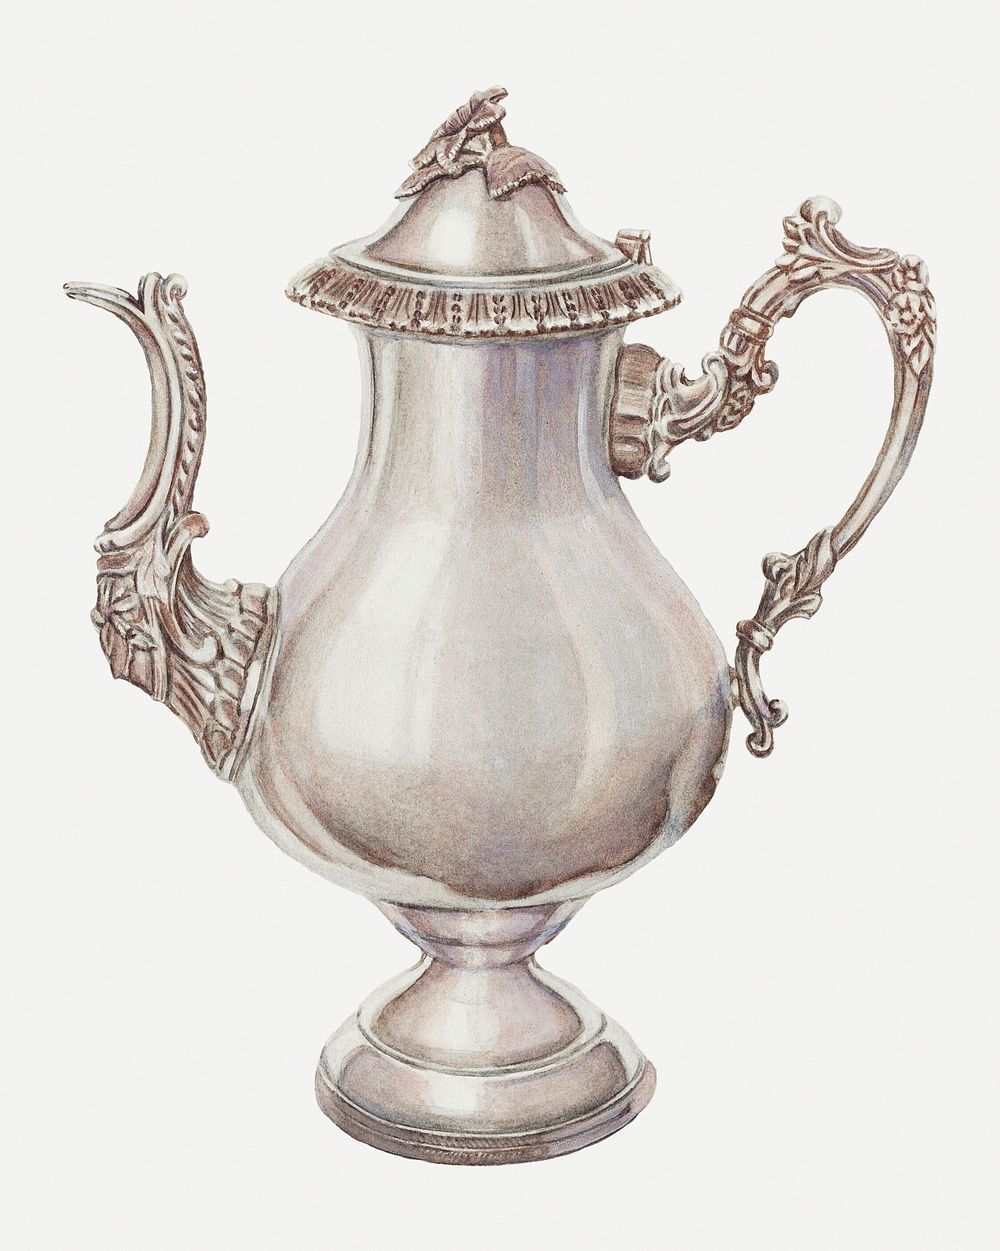 Vintage coffee pot psd illustration, remixed from the artwork by Ernest A. Towers, Jr